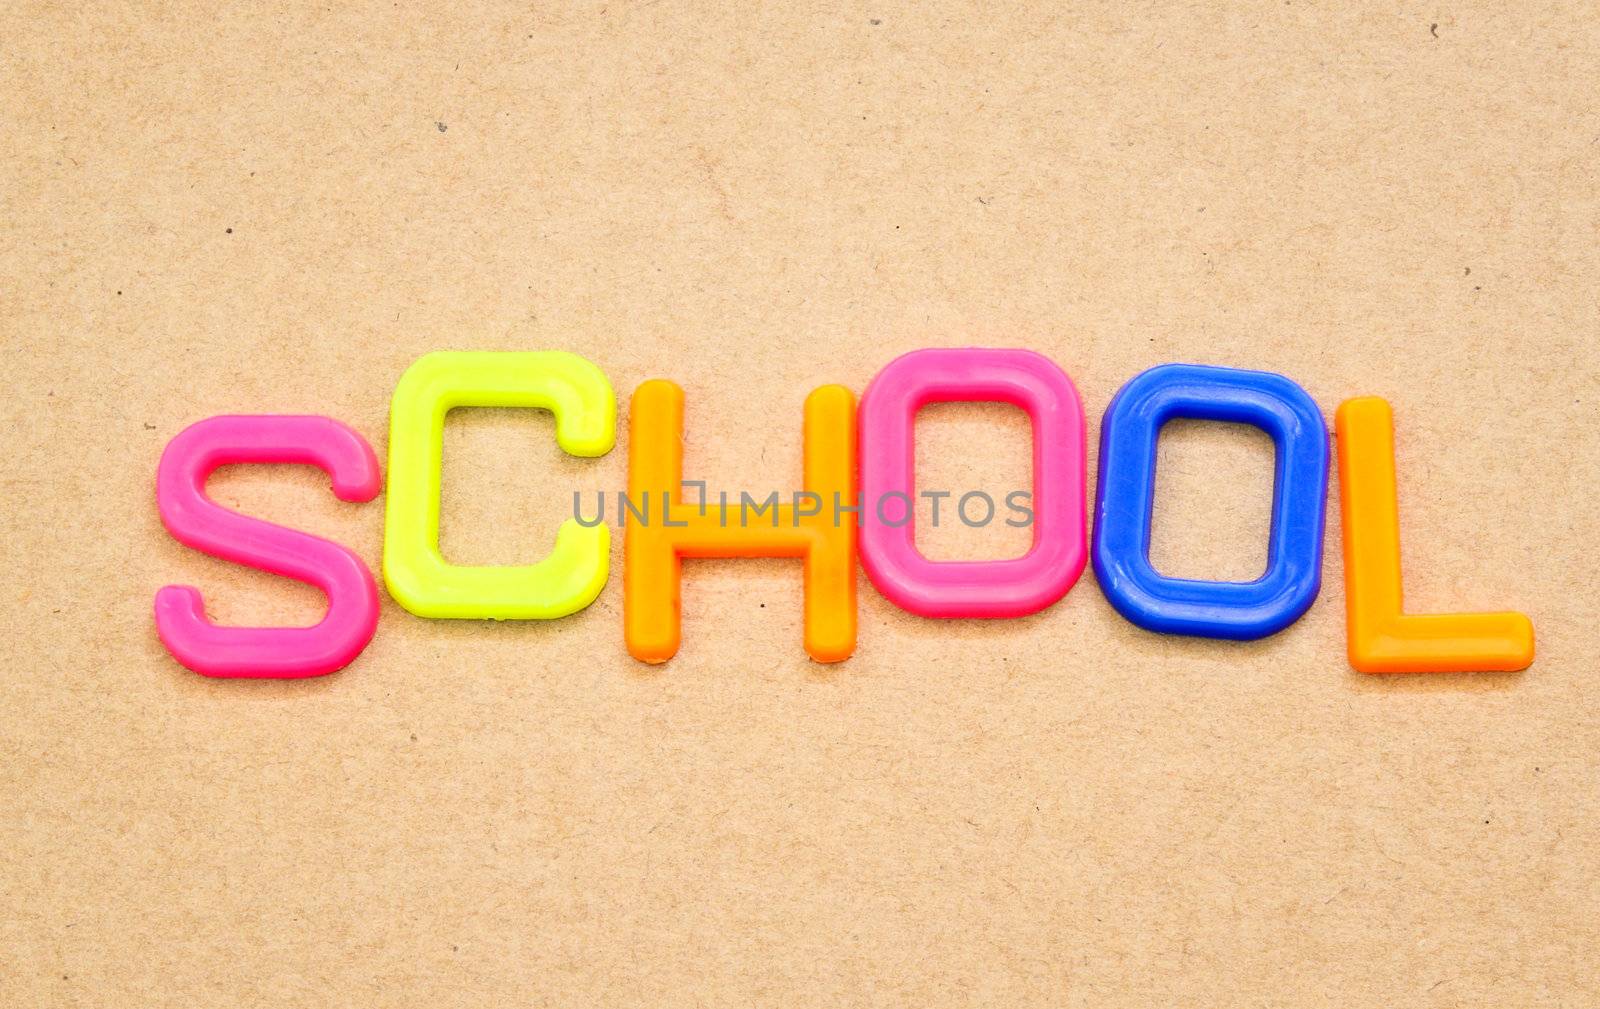 School in colorful toy letters on paper background  by nuchylee